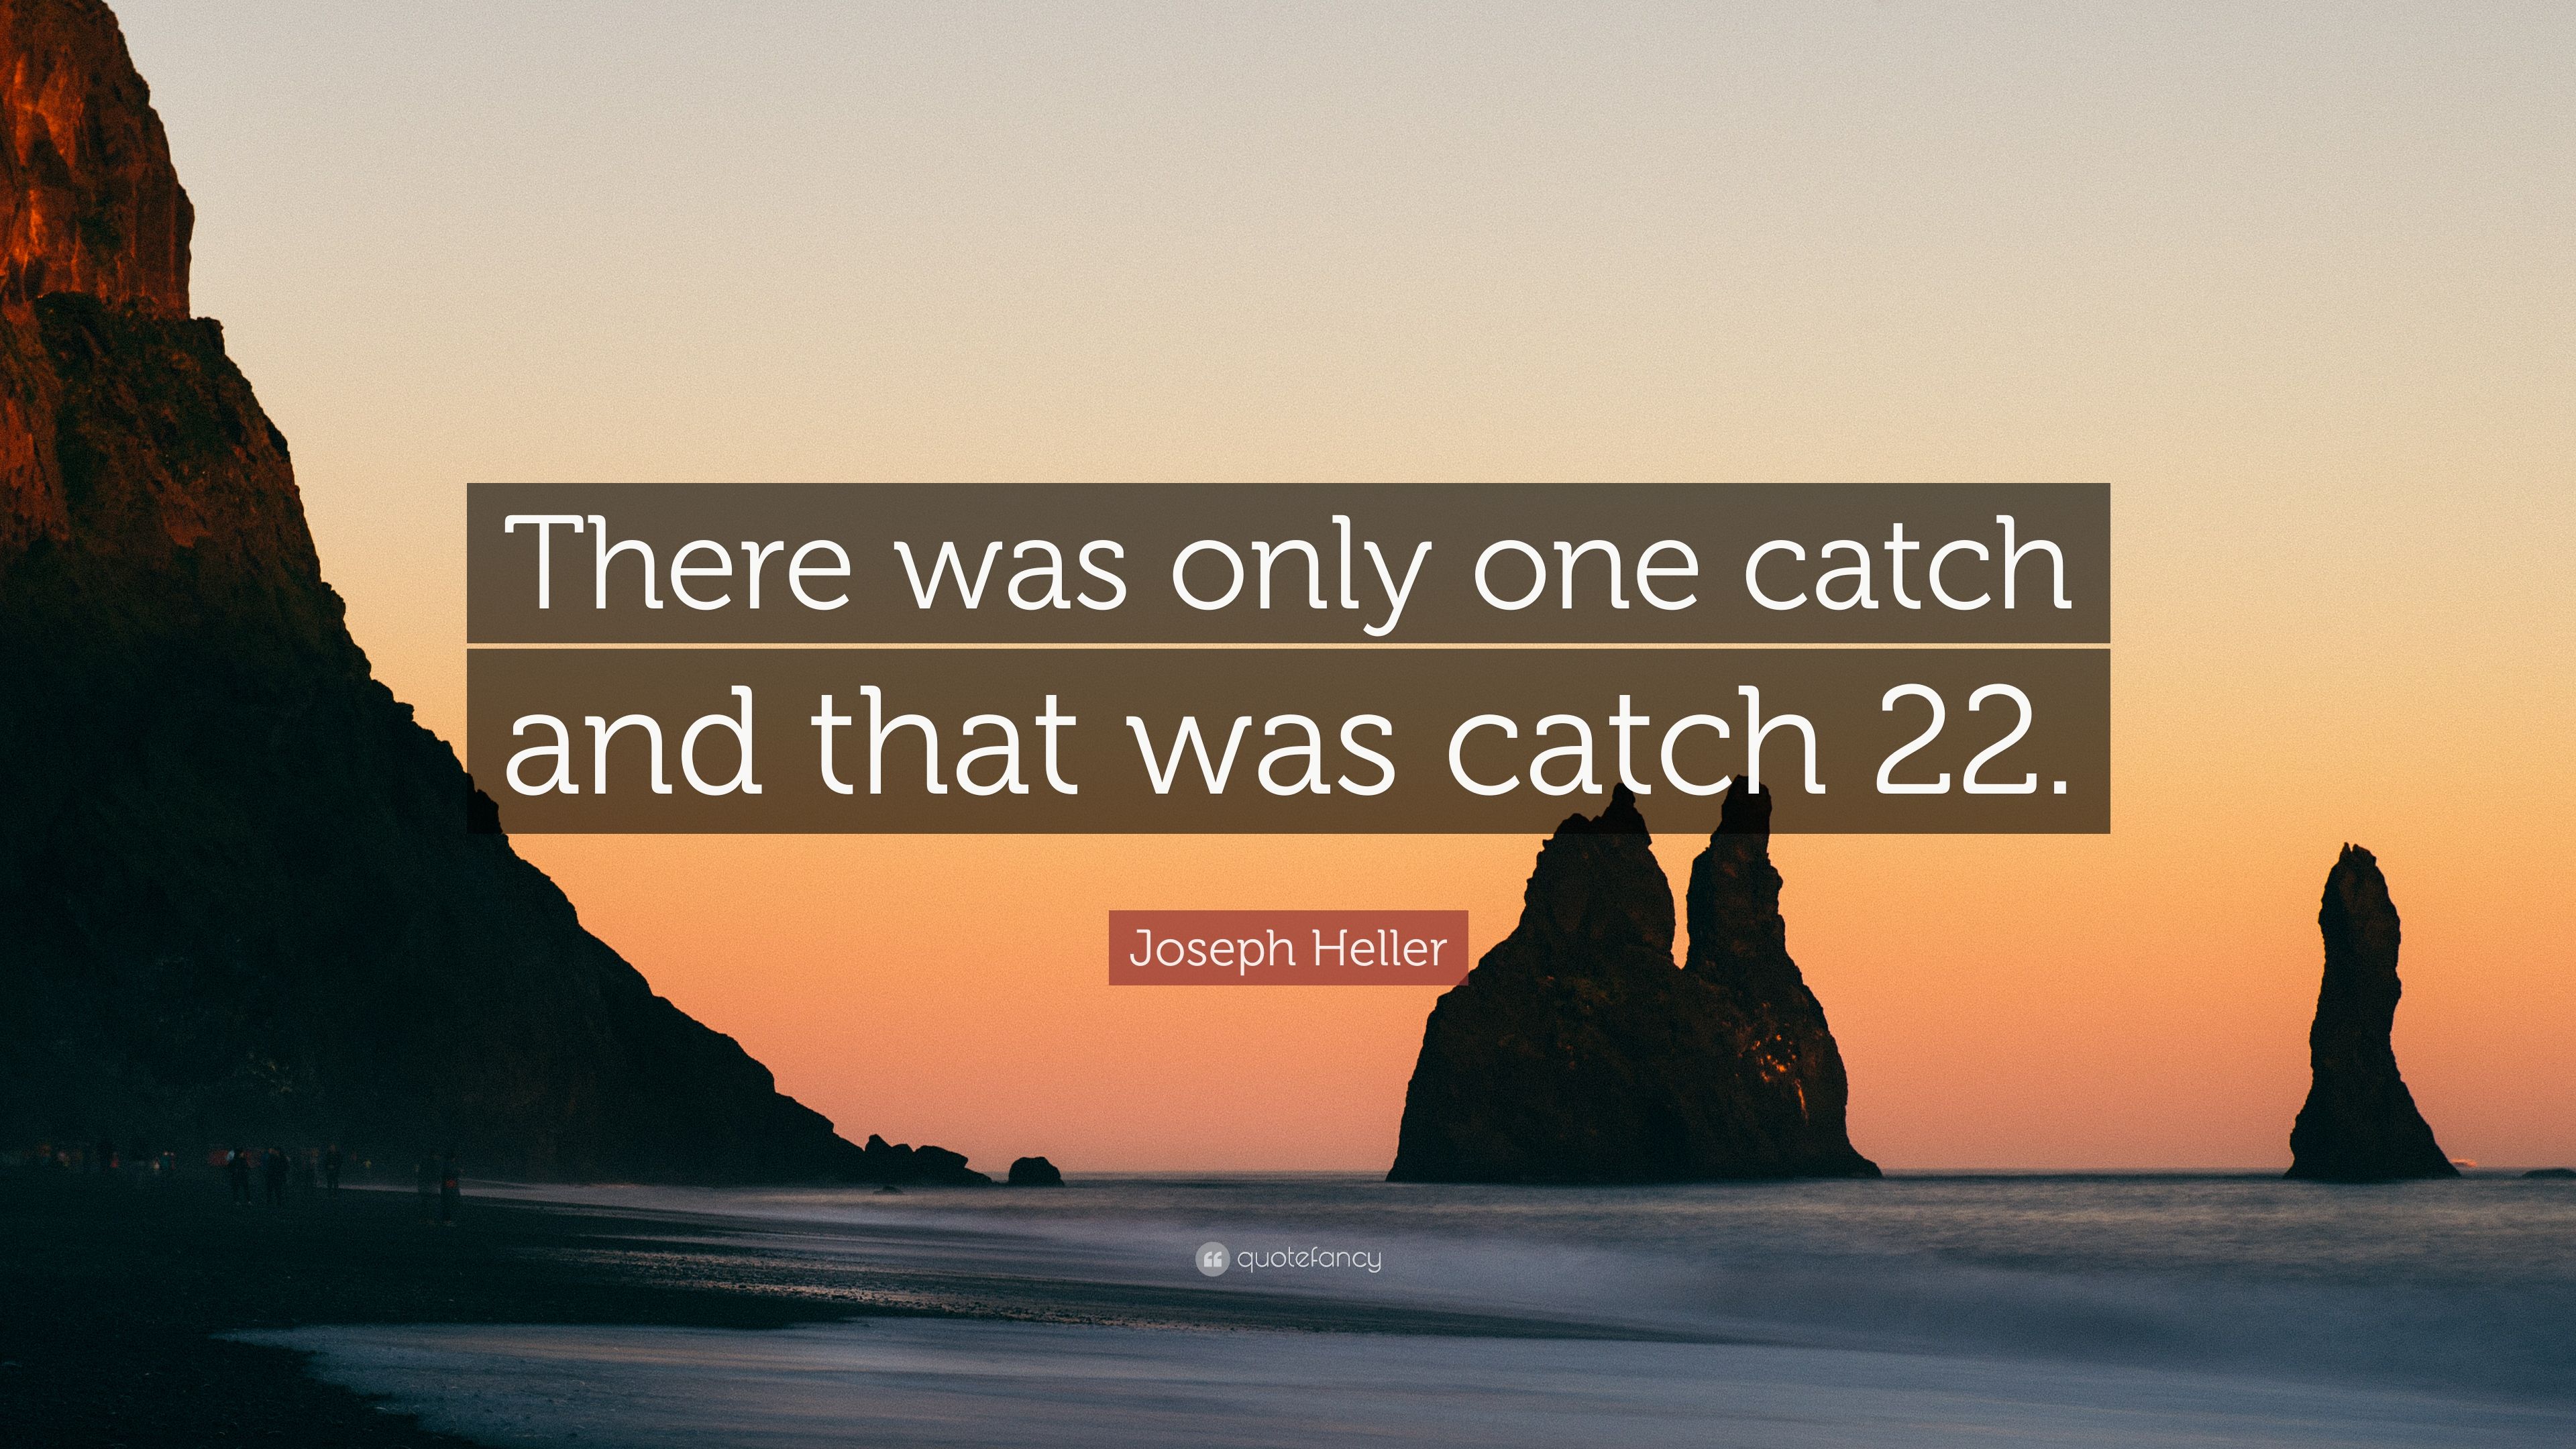 Joseph Heller Quote: “There was only one catch and that was catch 22